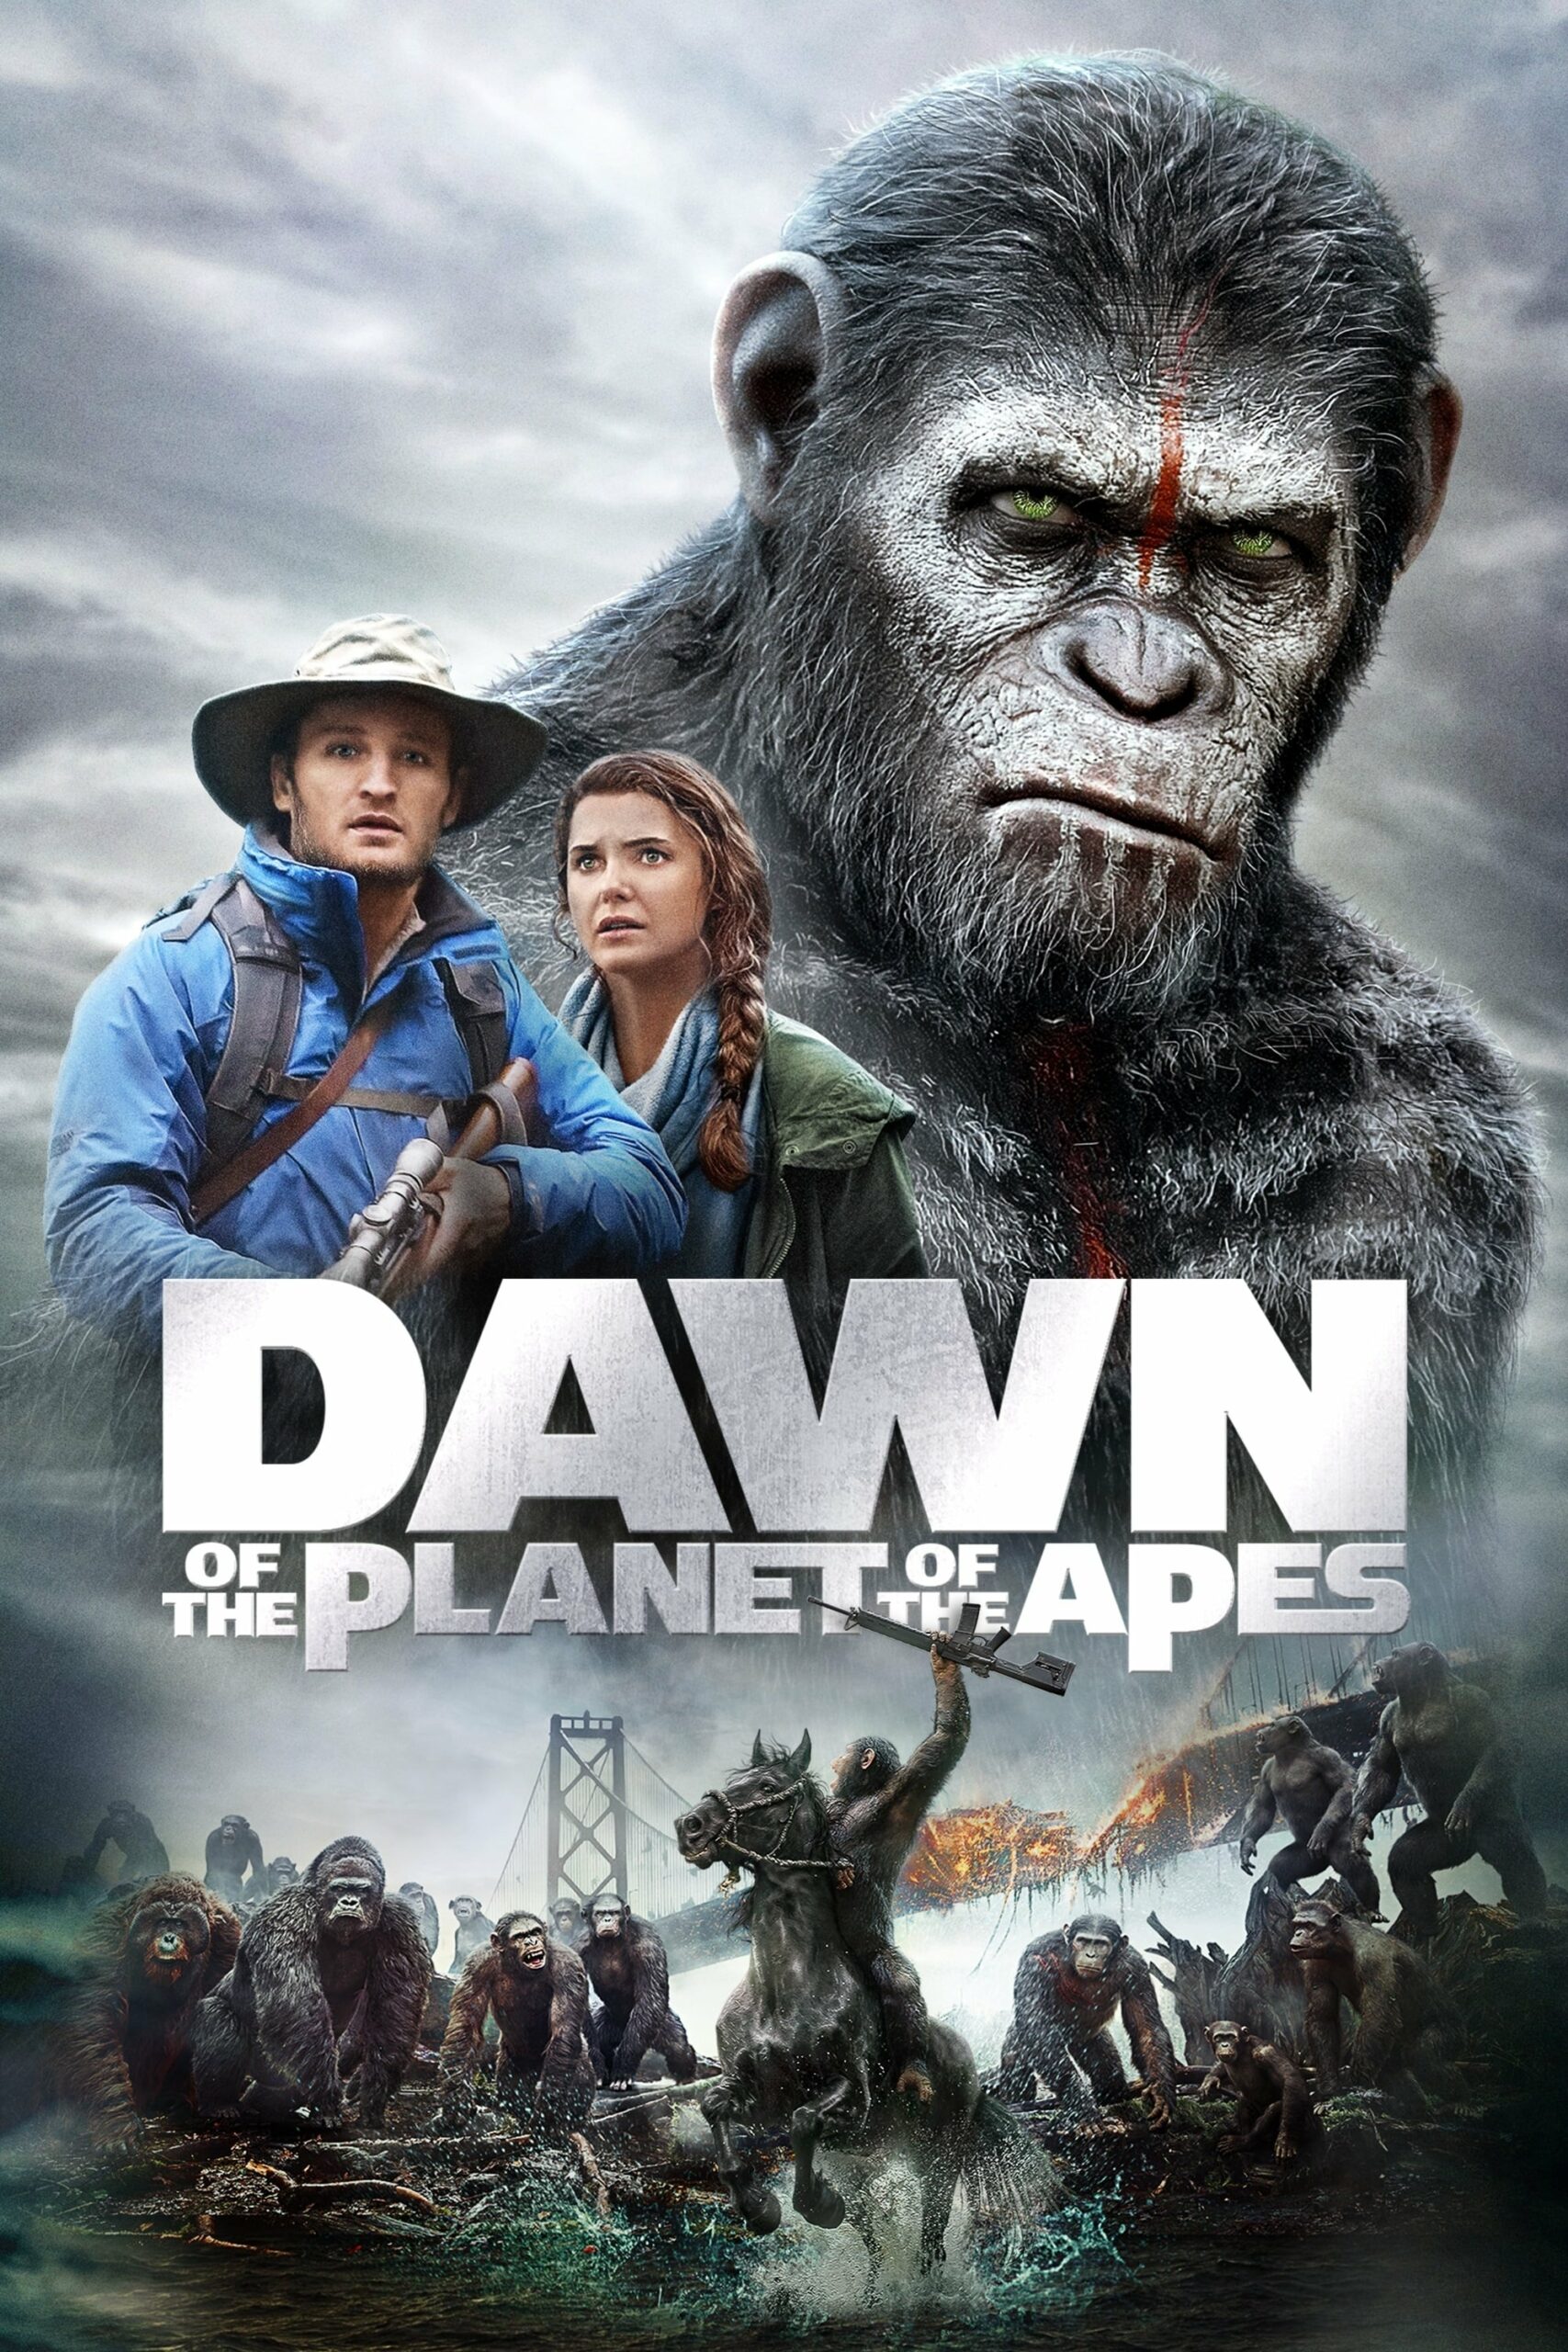 A Planet of the Apes Comic Book Idea for 20th Century Studios in Celebration of Dawn of the Planet of the Apes 10th Anniversary